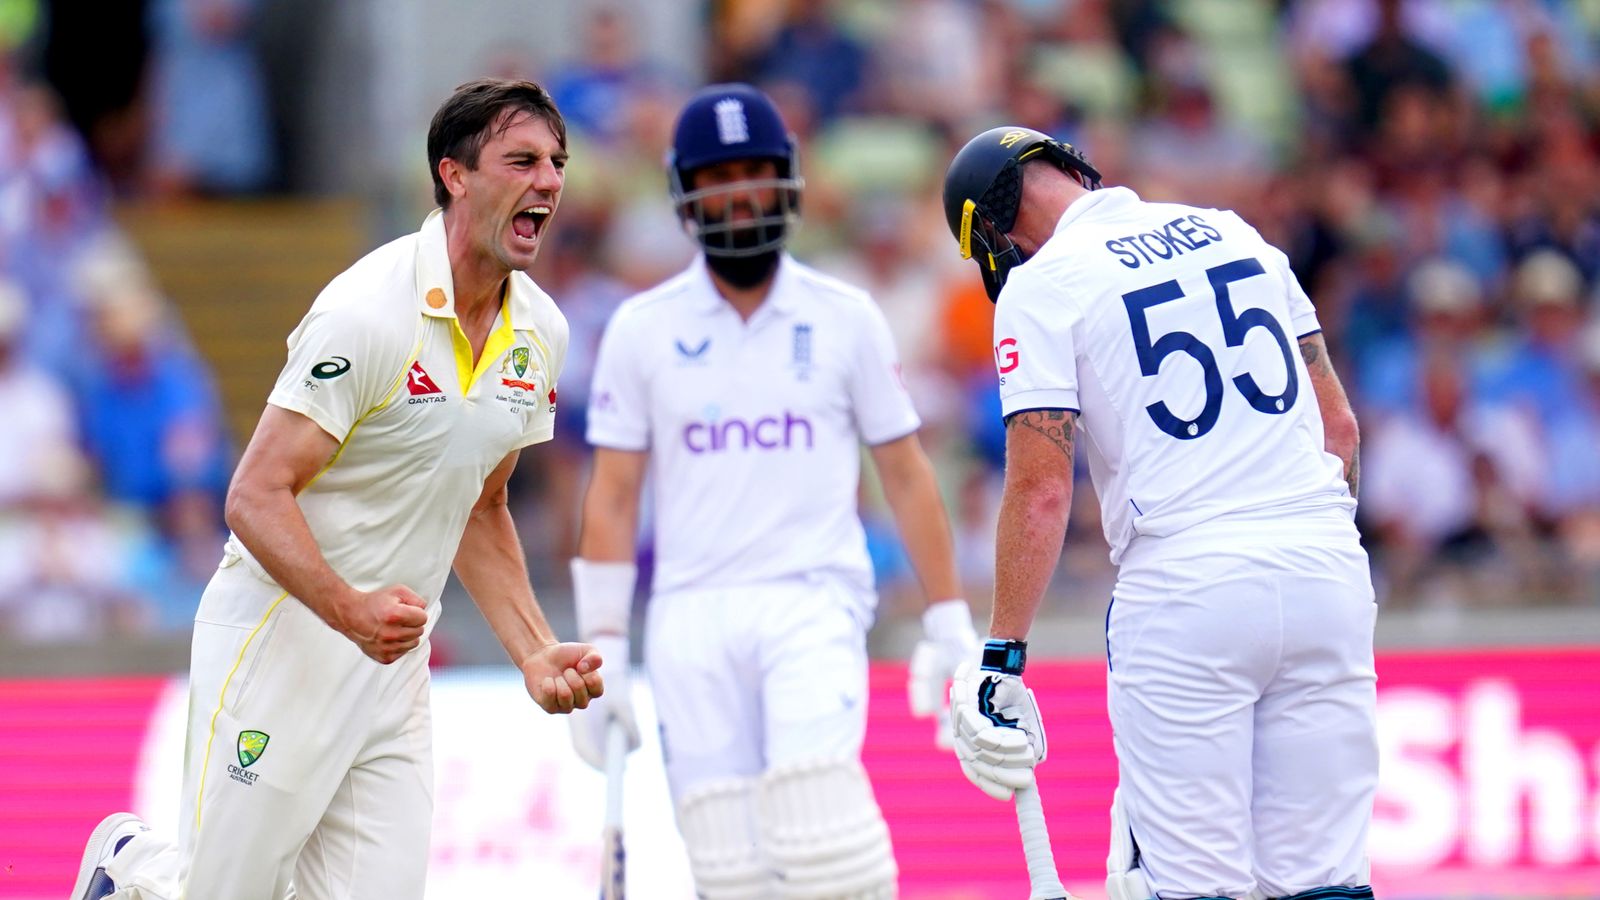 The Ashes Preview: Old Trafford the scene for potential series-clinching fourth Test